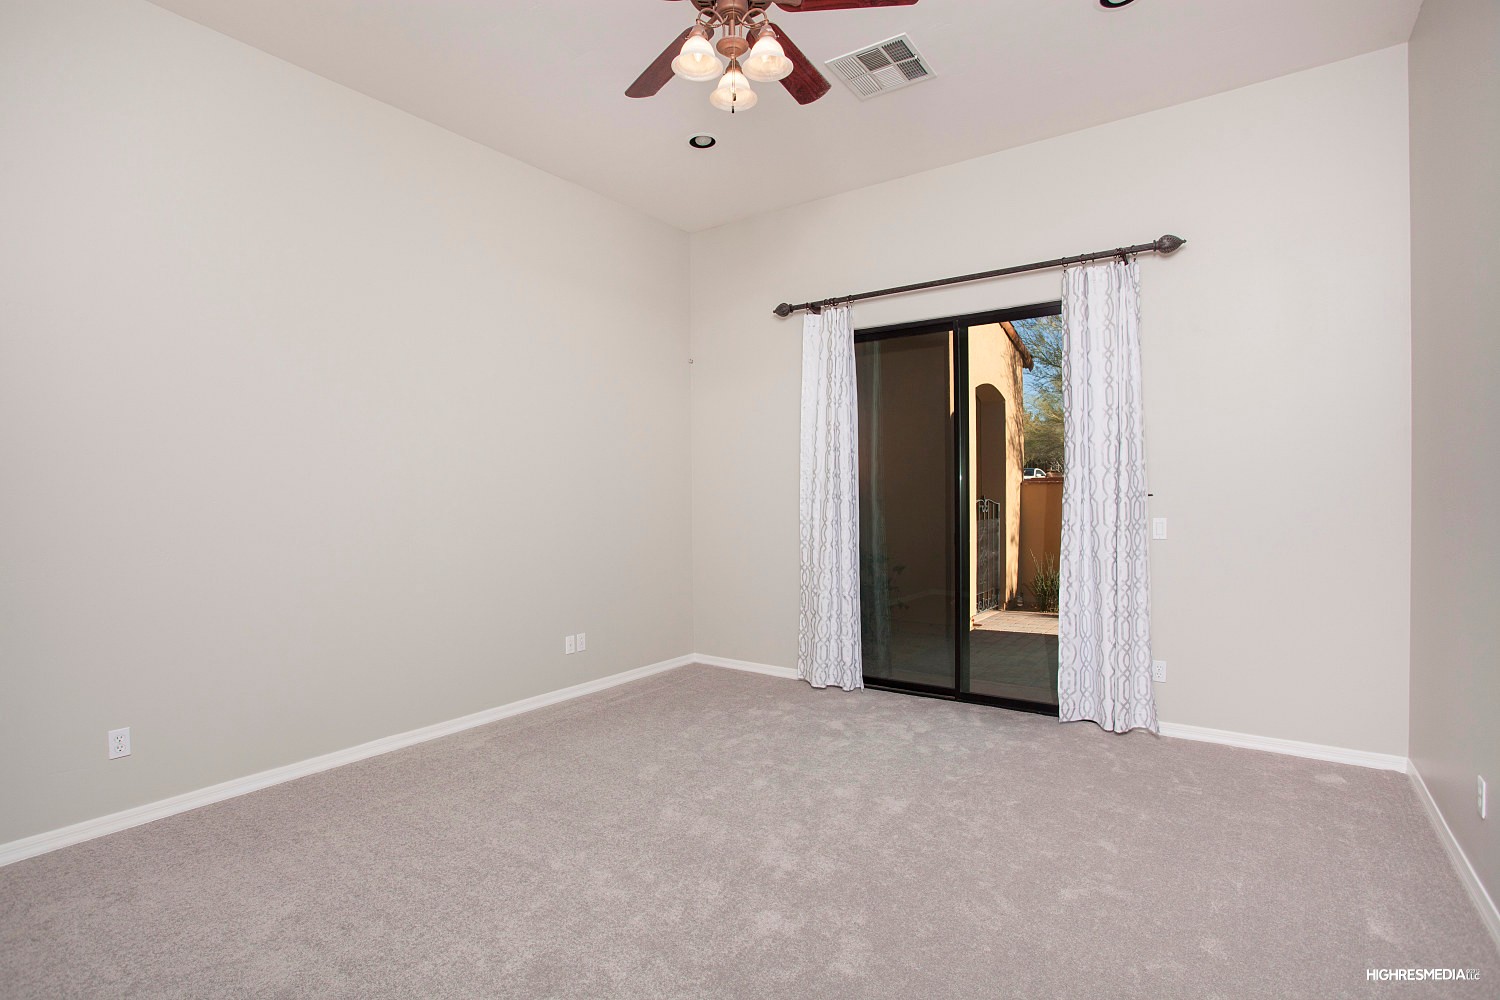 Owner's suite access to patio at this Scottsdale townhome for sale in Market Street at DC Ranch located at 20704 N 90th Pl #1005 Scottsdale, AZ 85255 listed by Don Matheson at The Matheson Team